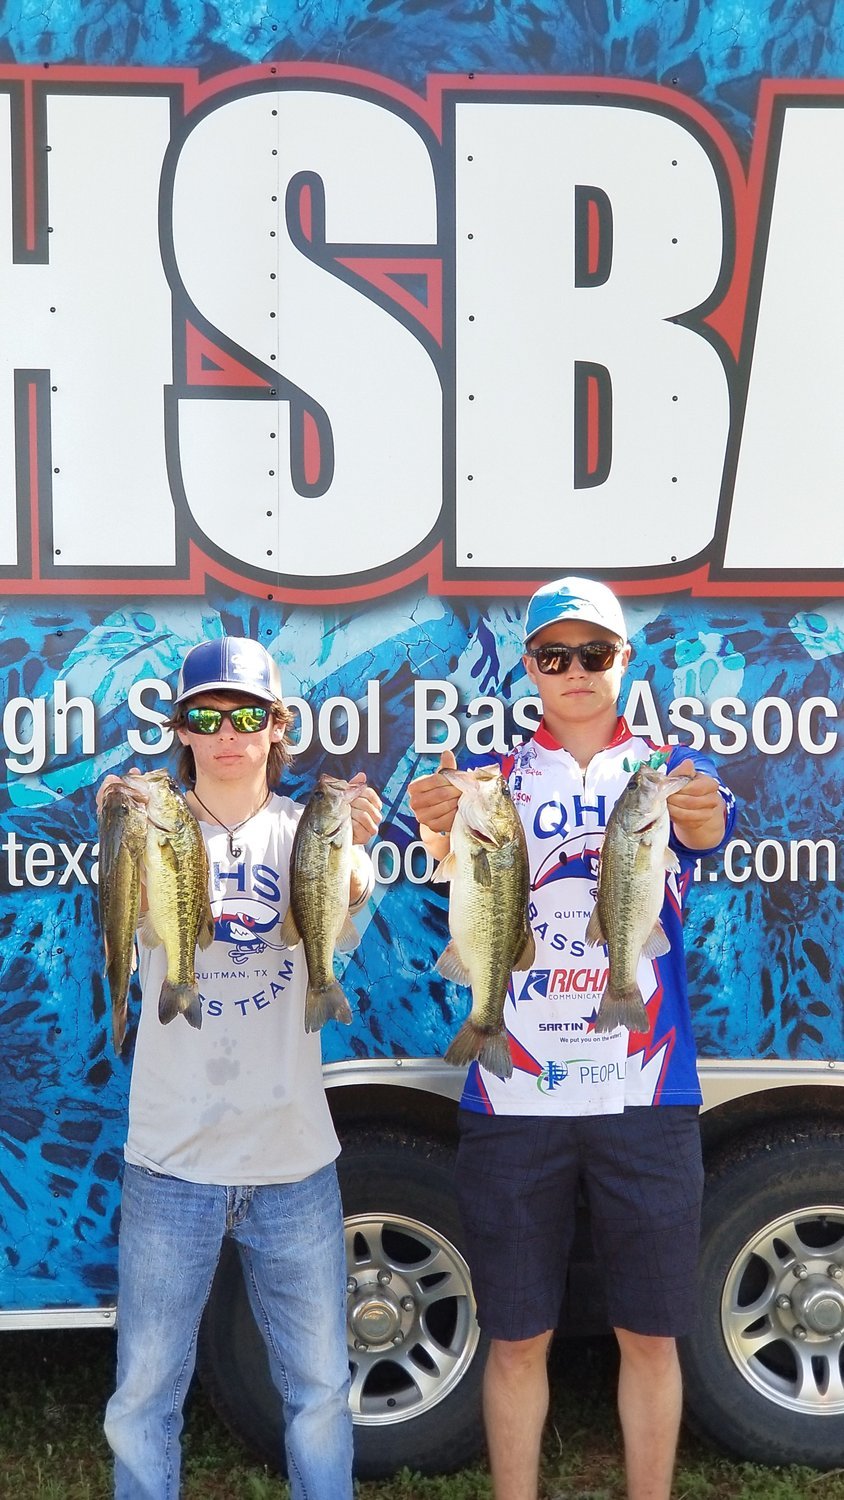 Seniors Colin “Layton” Brown (left) and Langdon Bautista and with their catches that qualified them for the state fishing tournament.